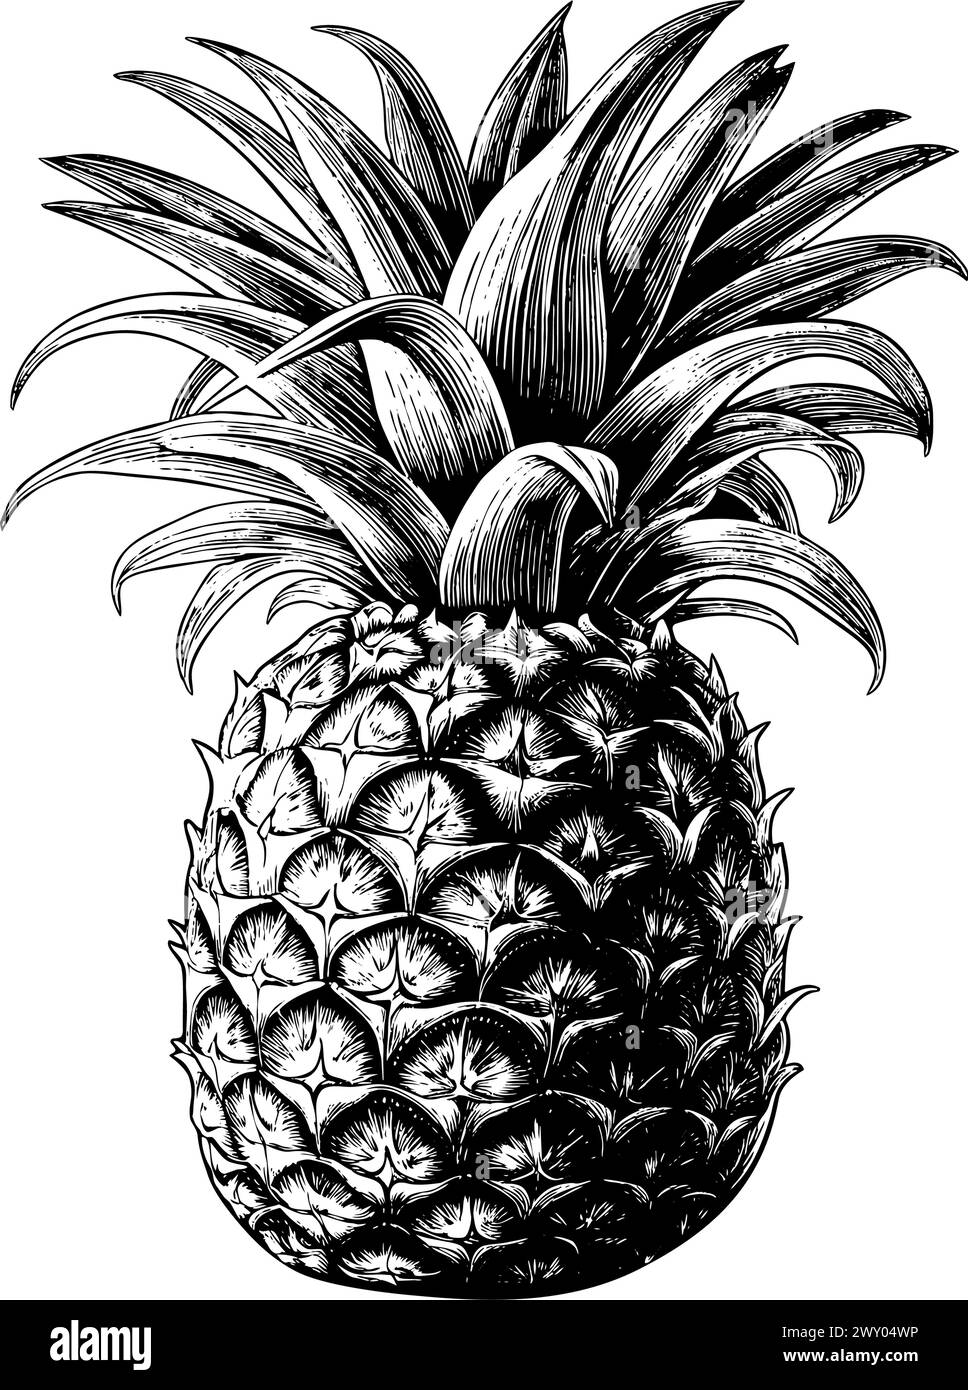 Pineapple engraving hand drawn isolated fruit Stock Vector